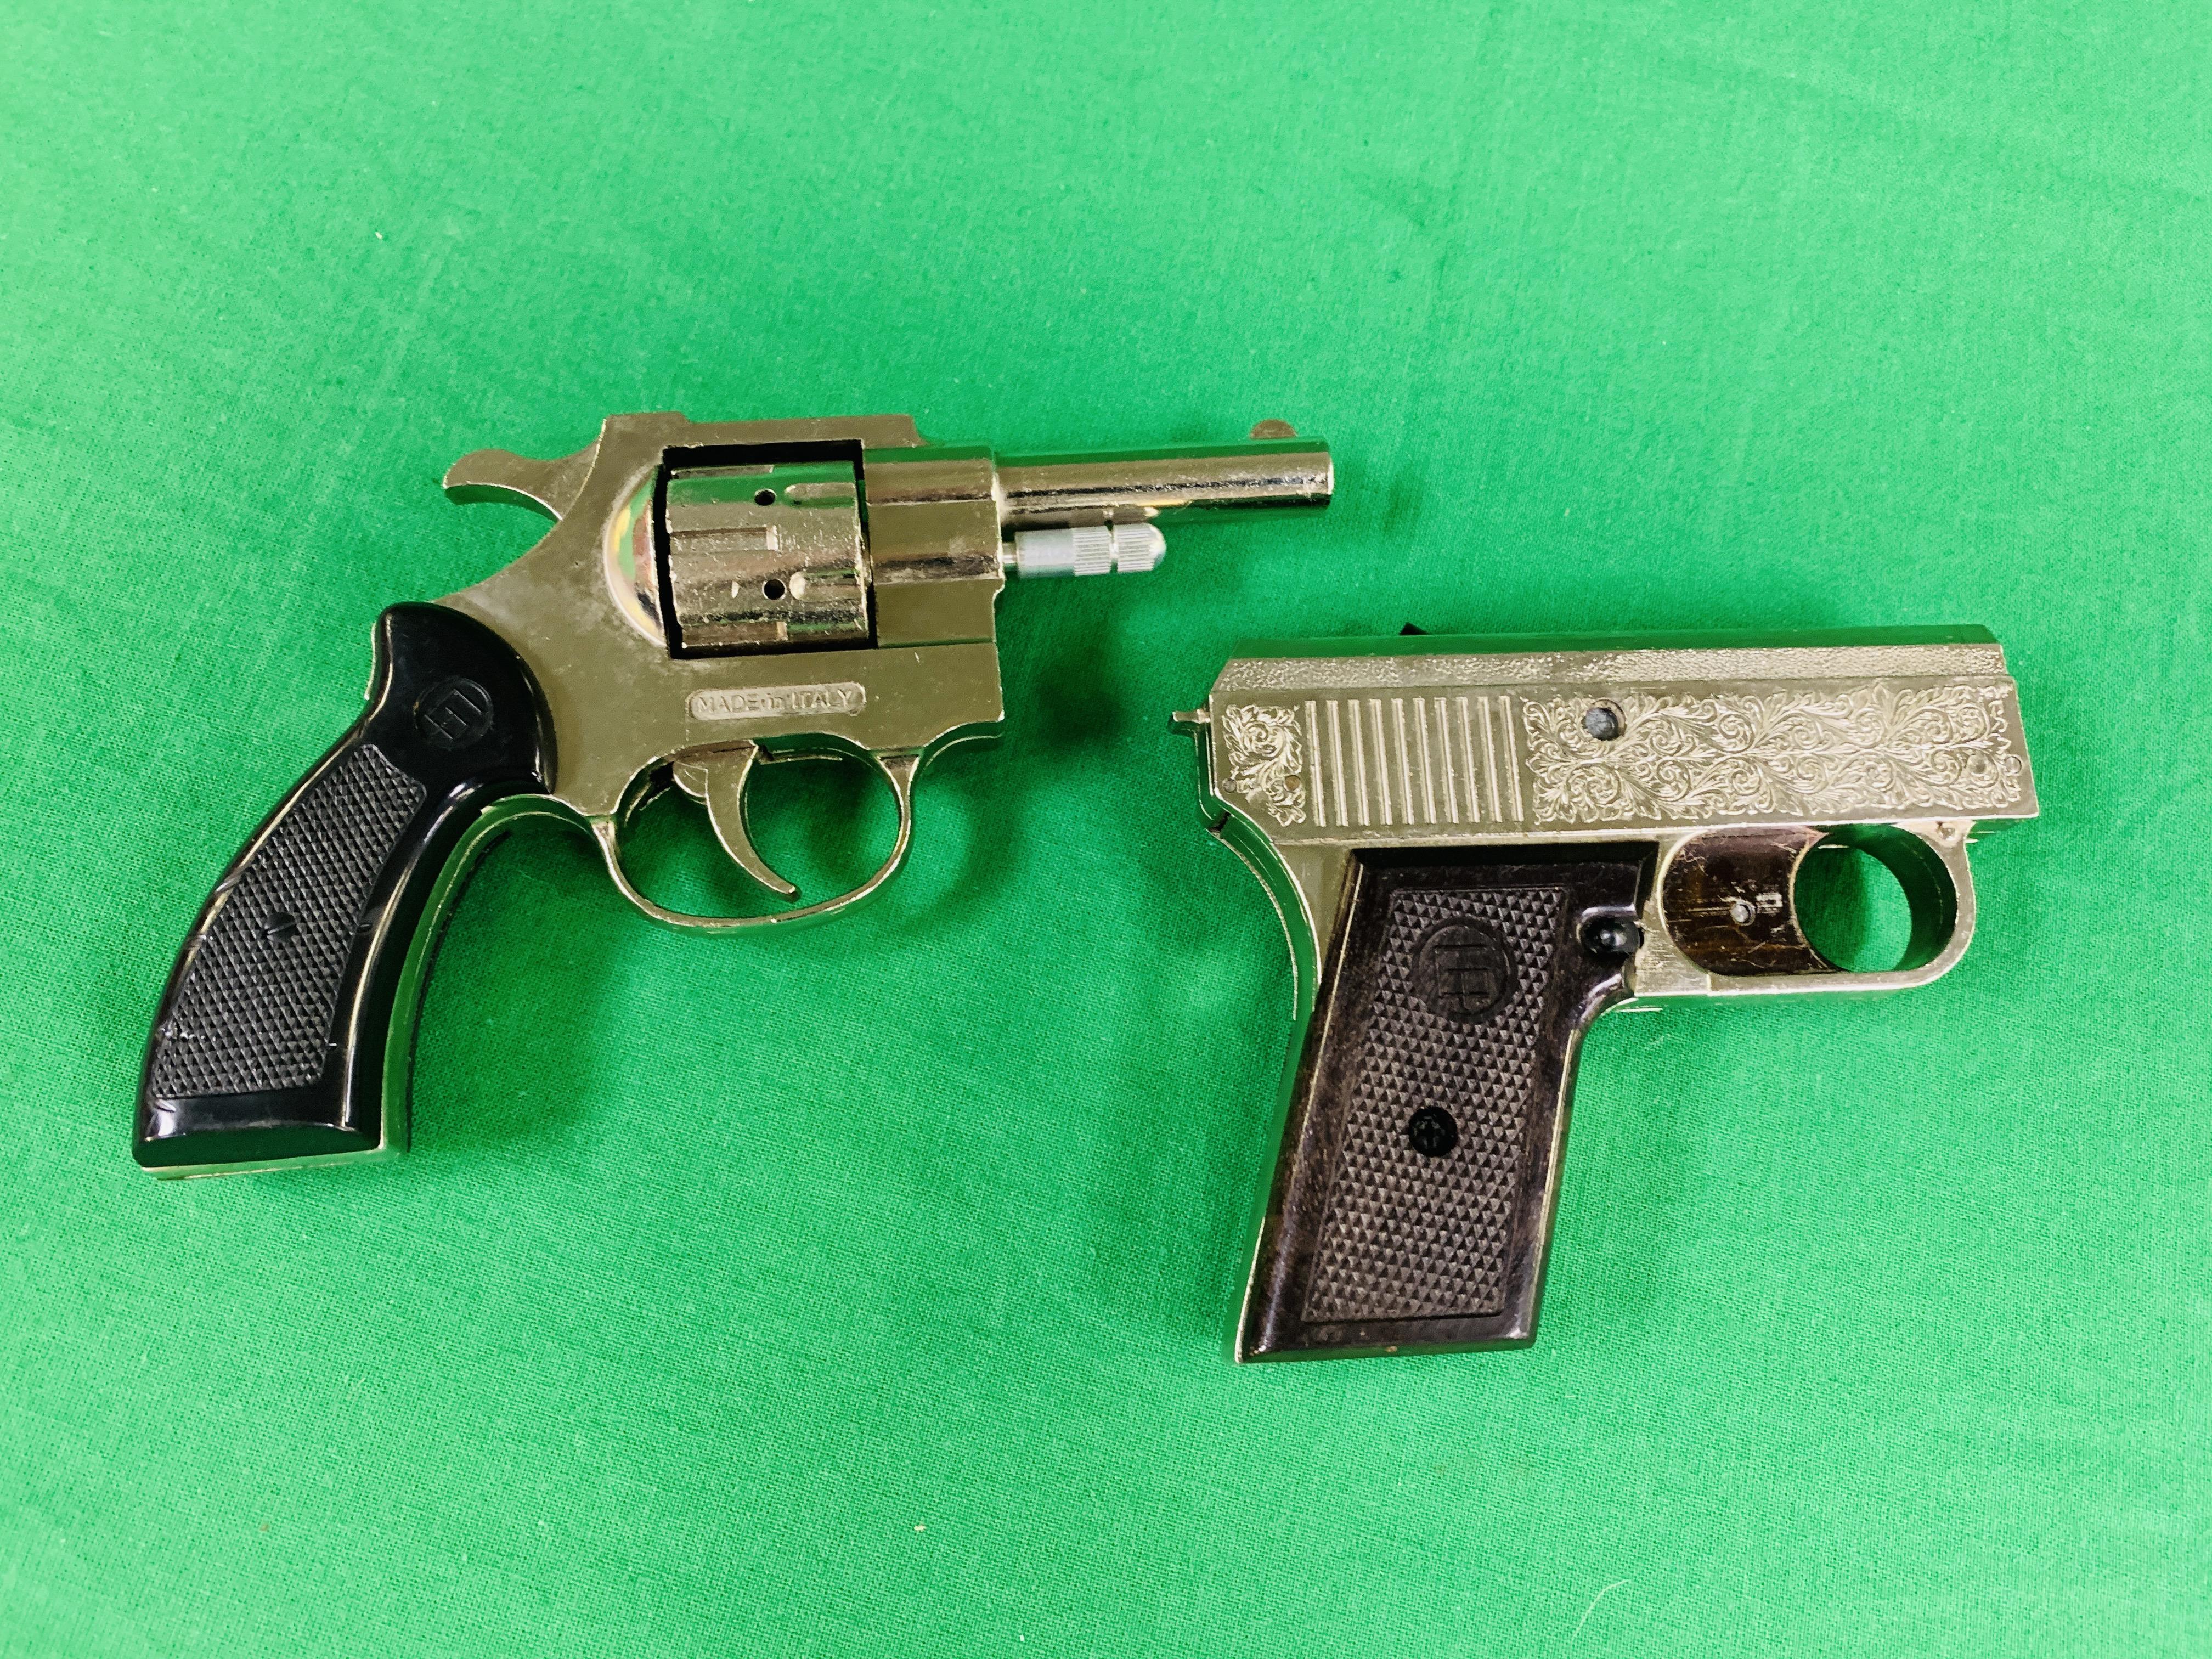 AN ITALIAN STARTING PISTOL ALONG WITH A FURTHER ITALIAN STARTING PISTOL - (ALL GUNS TO BE INSPECTED